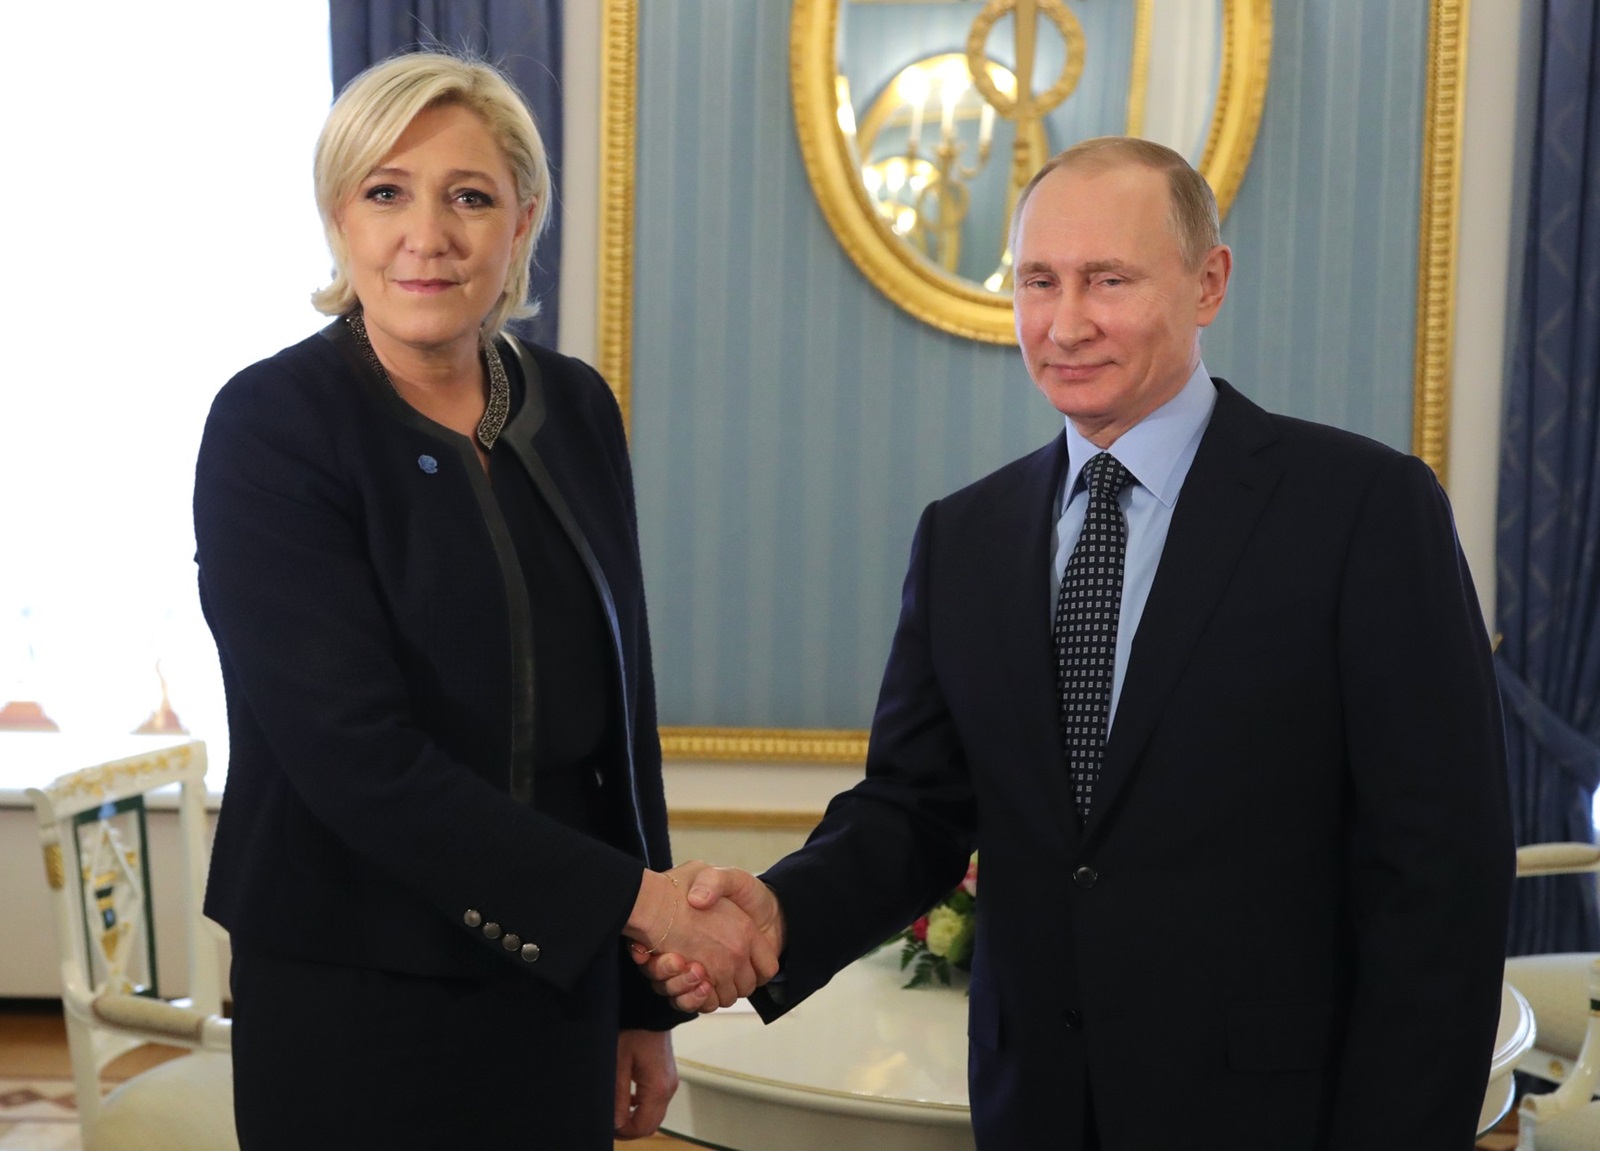 3056280 03/24/2017 March 24, 2017. Russian President Vladimir Putin meets with French presidential candidate Marine Le Pen, leader of the Front National French political party.,Image: 326397124, License: Rights-managed, Restrictions: Editors' note: THIS IMAGE IS PROVIDED BY RUSSIAN STATE-OWNED AGENCY SPUTNIK., Model Release: no, Credit line: Michael Klimentyev / Sputnik / Profimedia